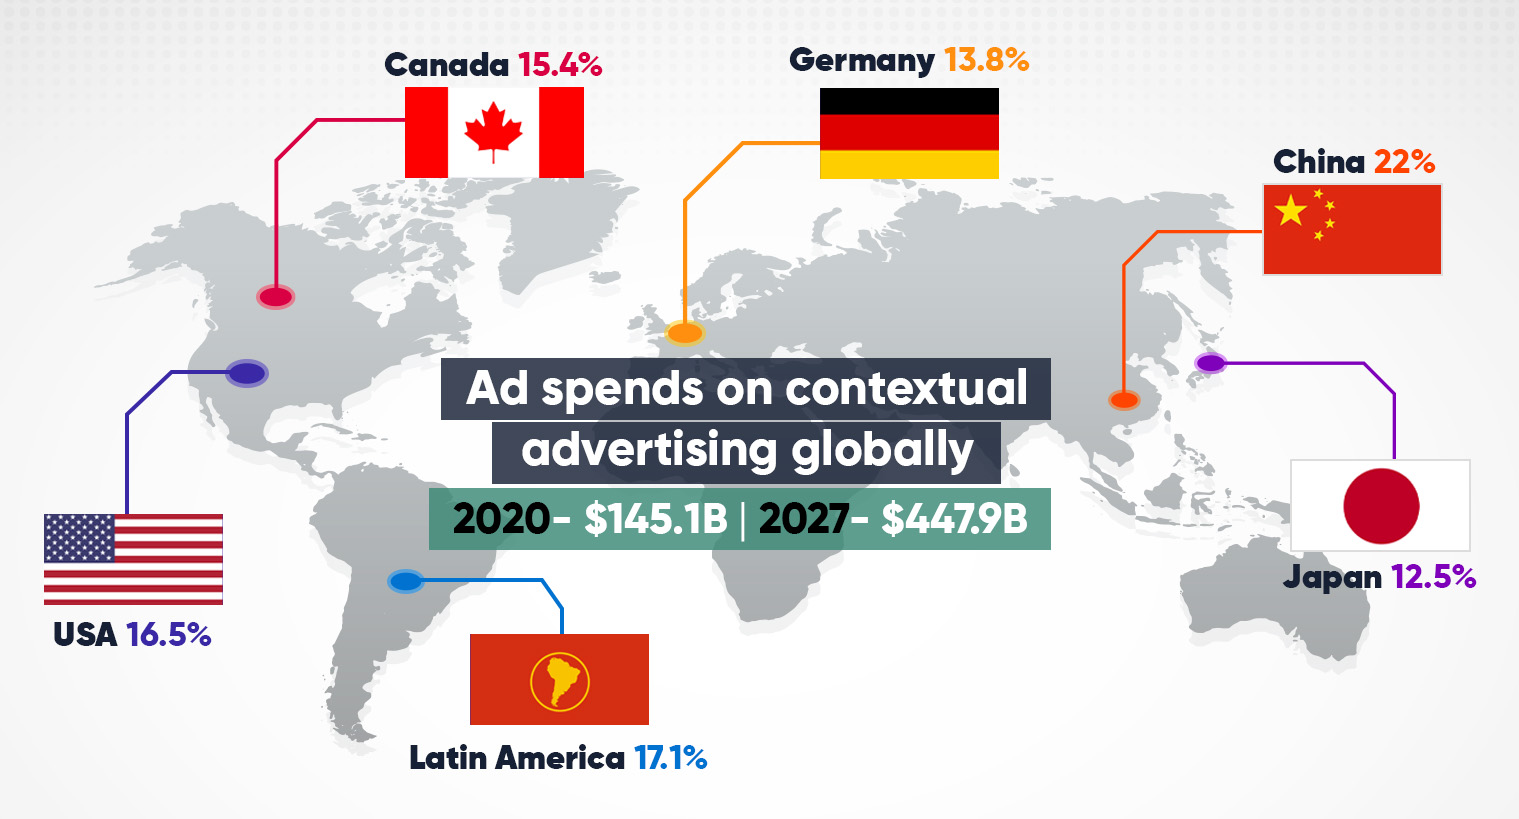 ad spend on contextual advertising globally